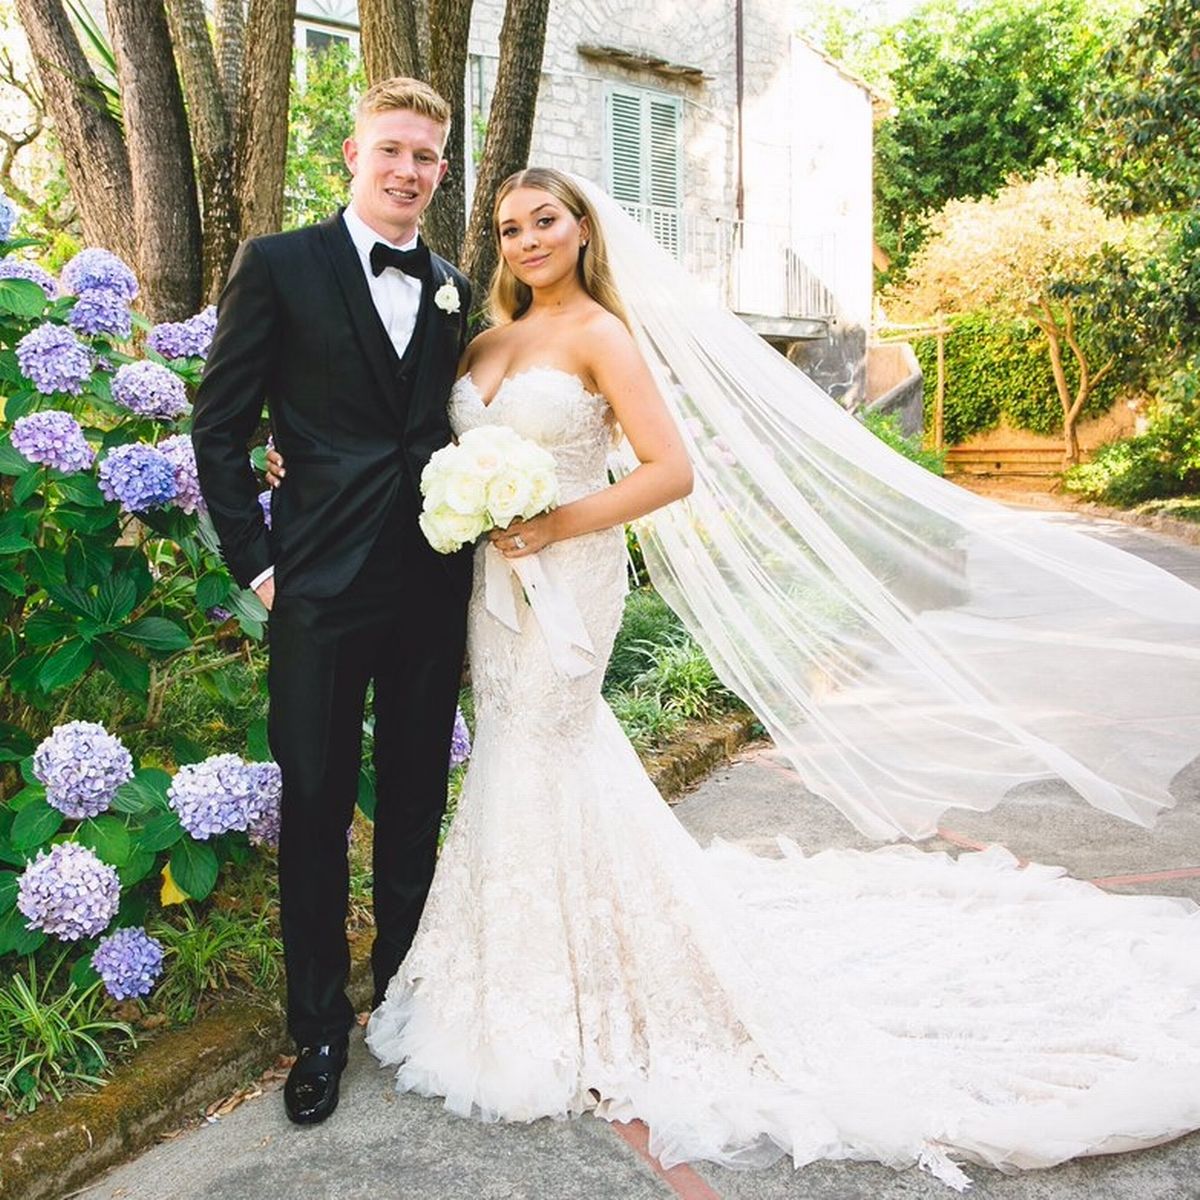 Who is Kevin De Bruyne' Wife?